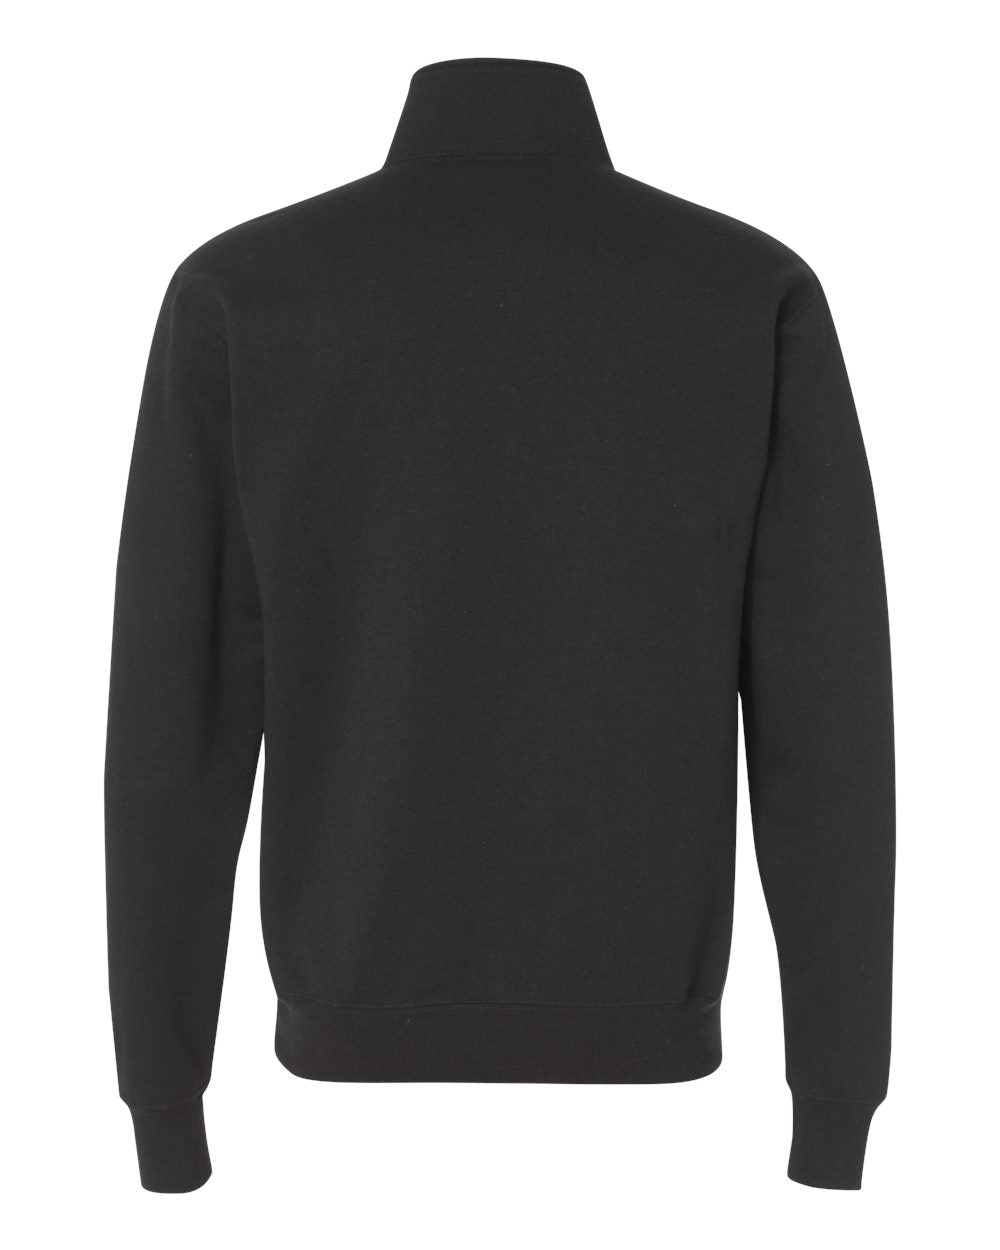 fully customizable champion power blend quarterzip pullover sweater with center pocketfor your brand in multiple colors